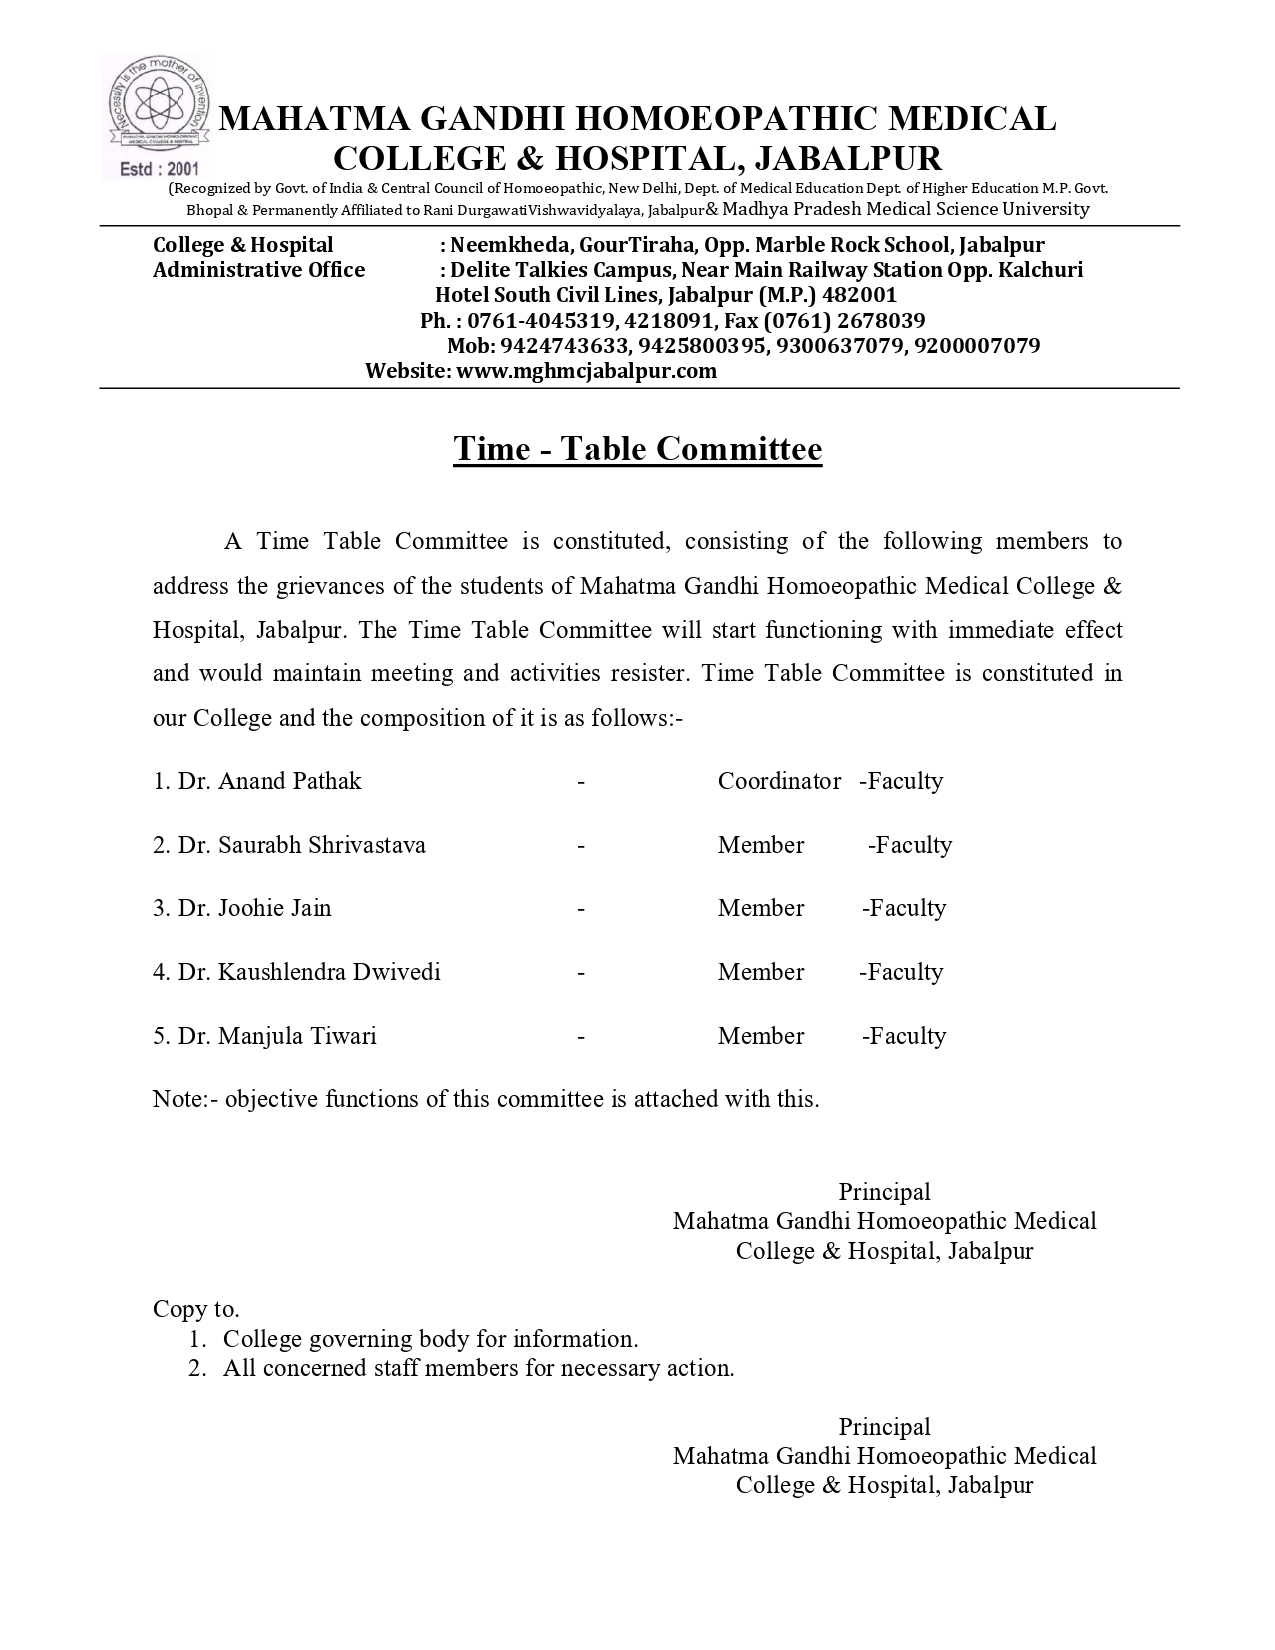 Mahatma Gandhi Homoeopathic Medical College & Hospital Time-Table Committee